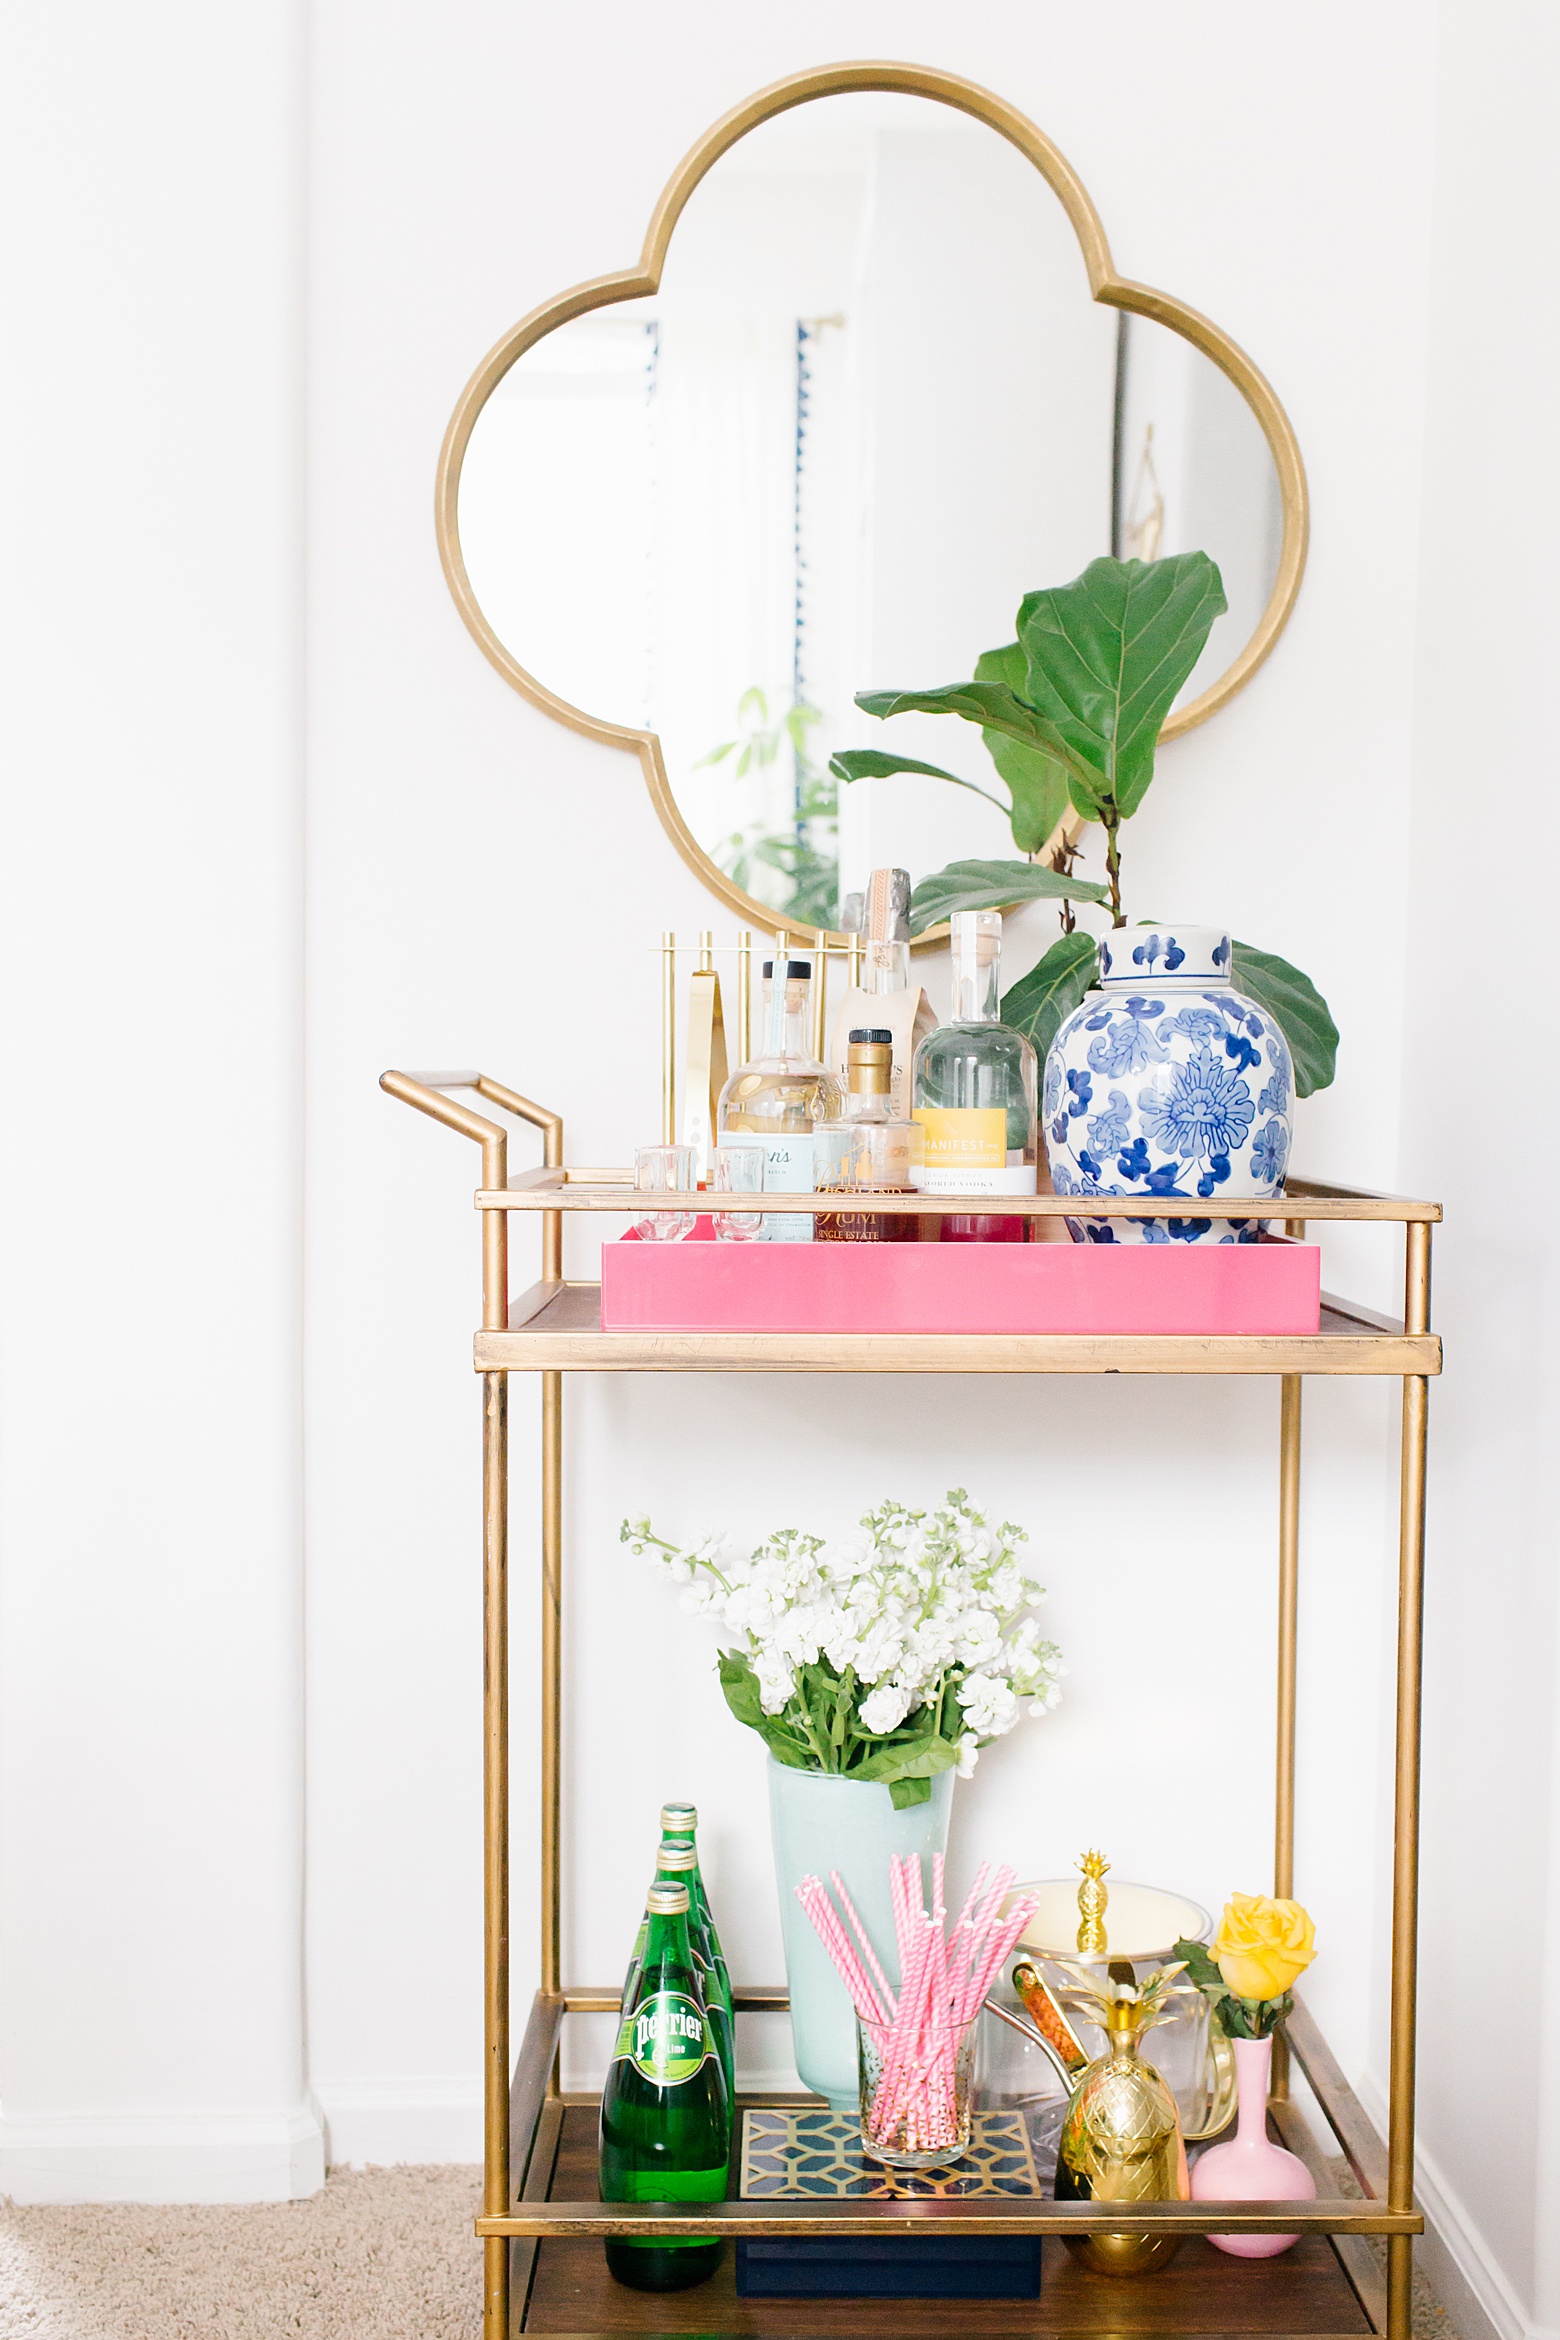 Colorful Bar Cart decor in this colorful dining room tour on Megan Martin Creative. Target bar cart, quatrefoil mirror, fiddle fig plant, chinoiserie, white walls, bright home decor, colorful home